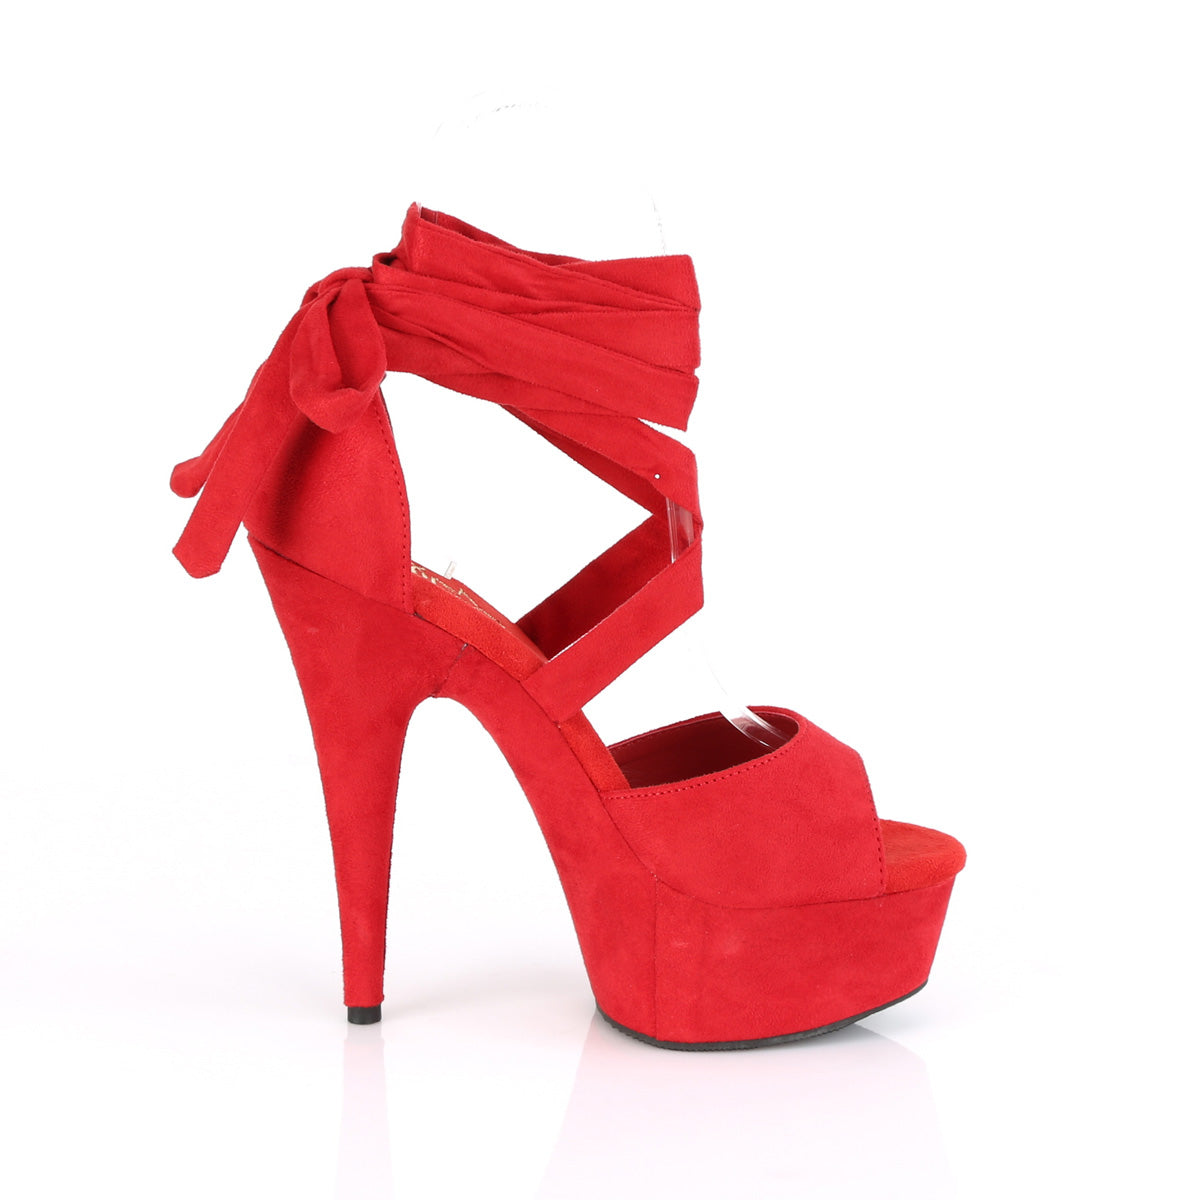 Pleaser Sandali da donna DELIGHT-679 RED FAUX Suede / Red Faux Suede